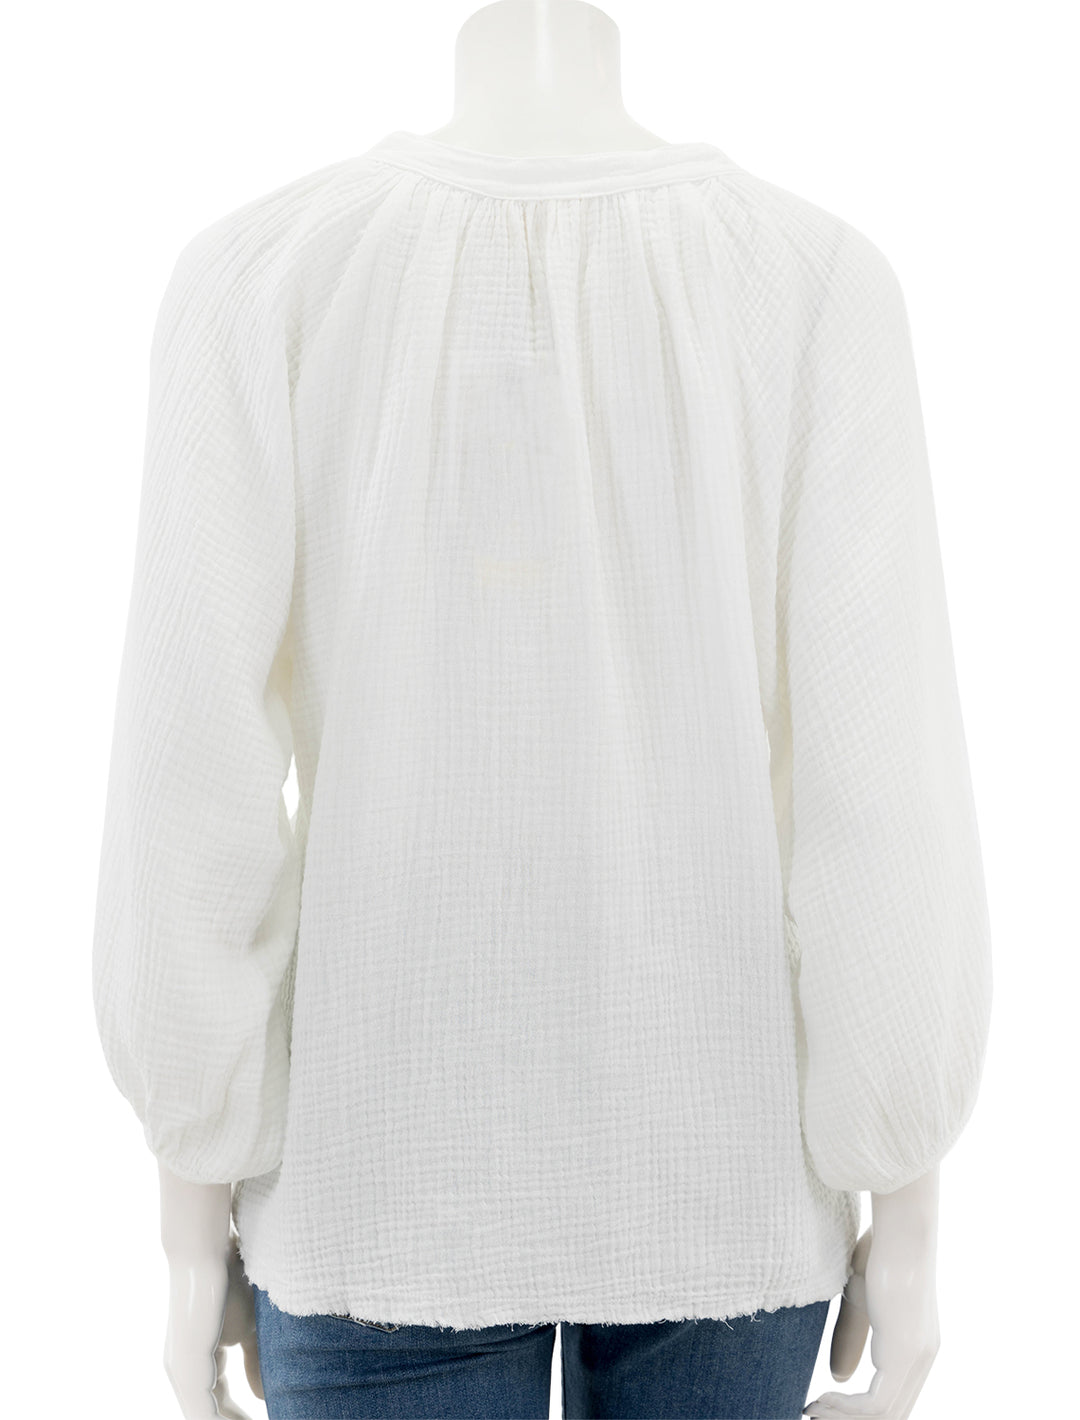 Back view of Nation LTD's mimi romance top in white.